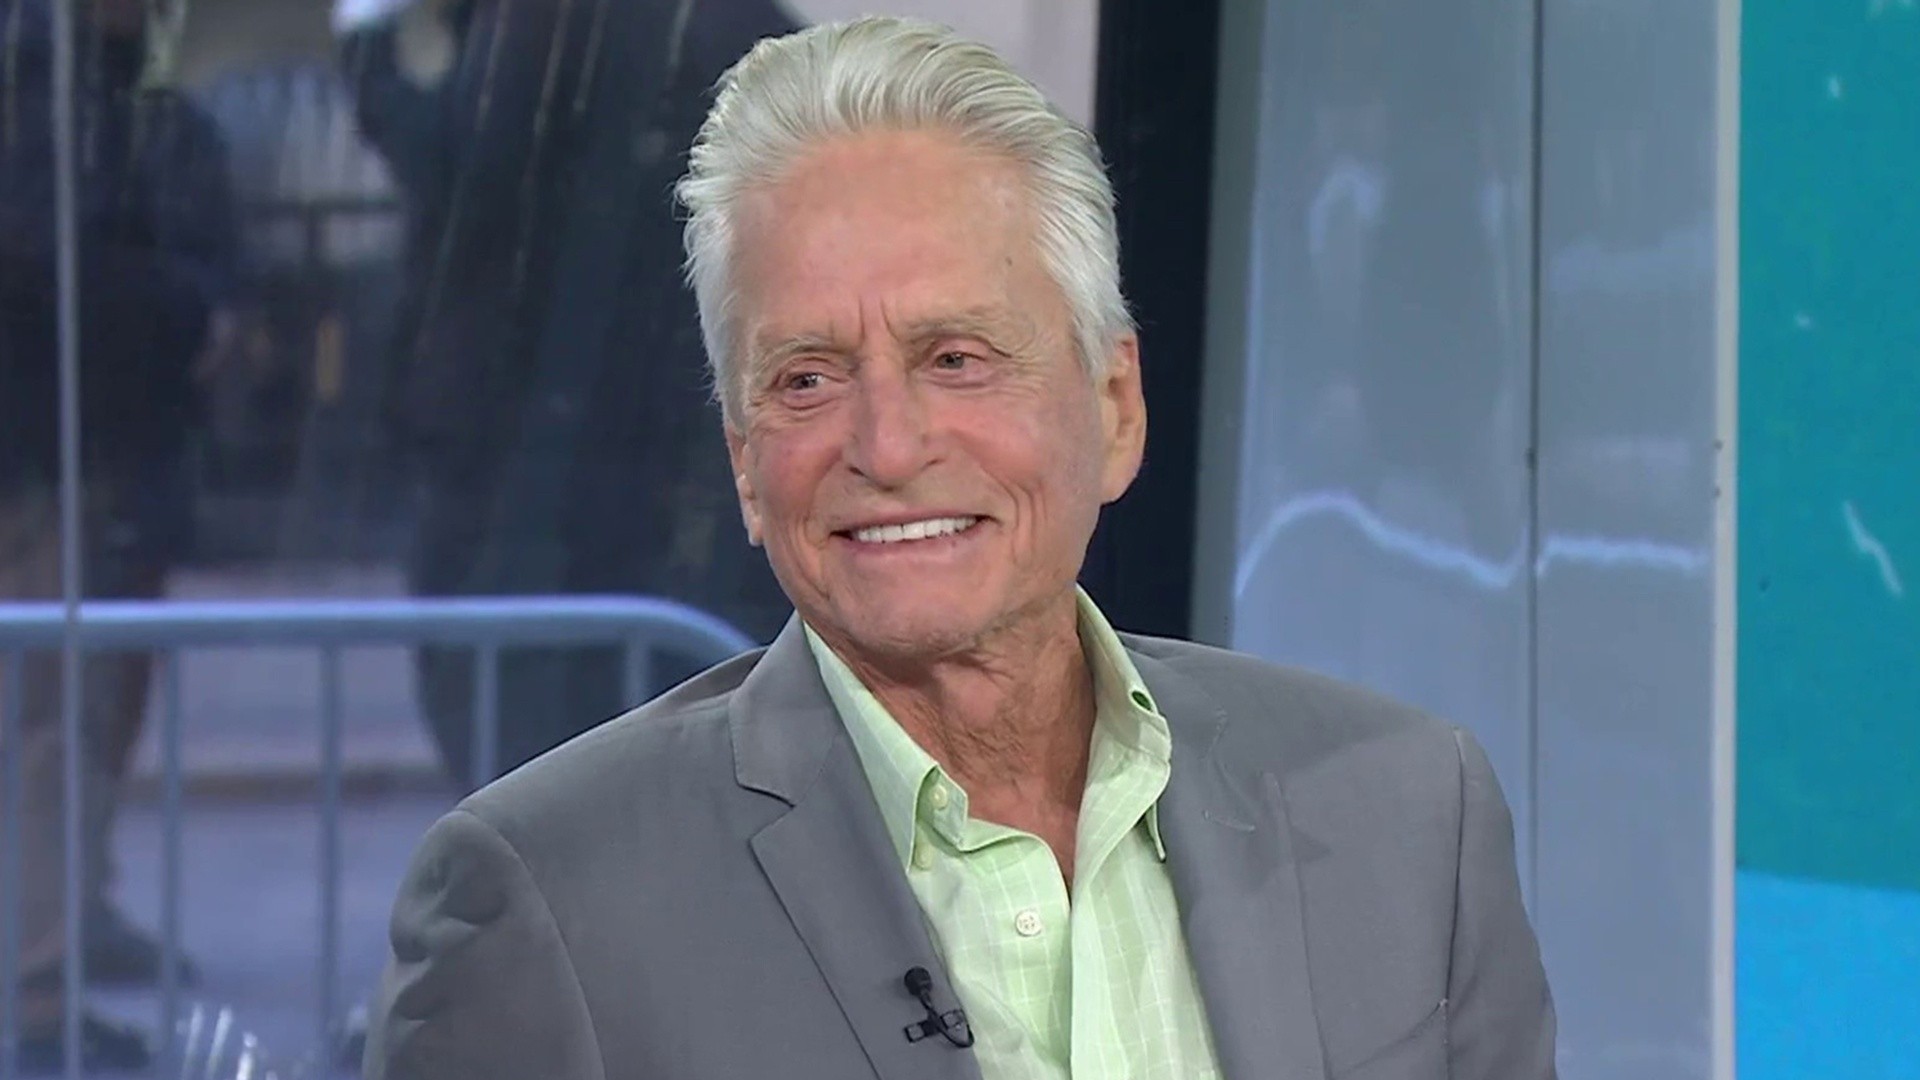 Michael Douglas on 'parallels' that drew him to 'Franklin' series